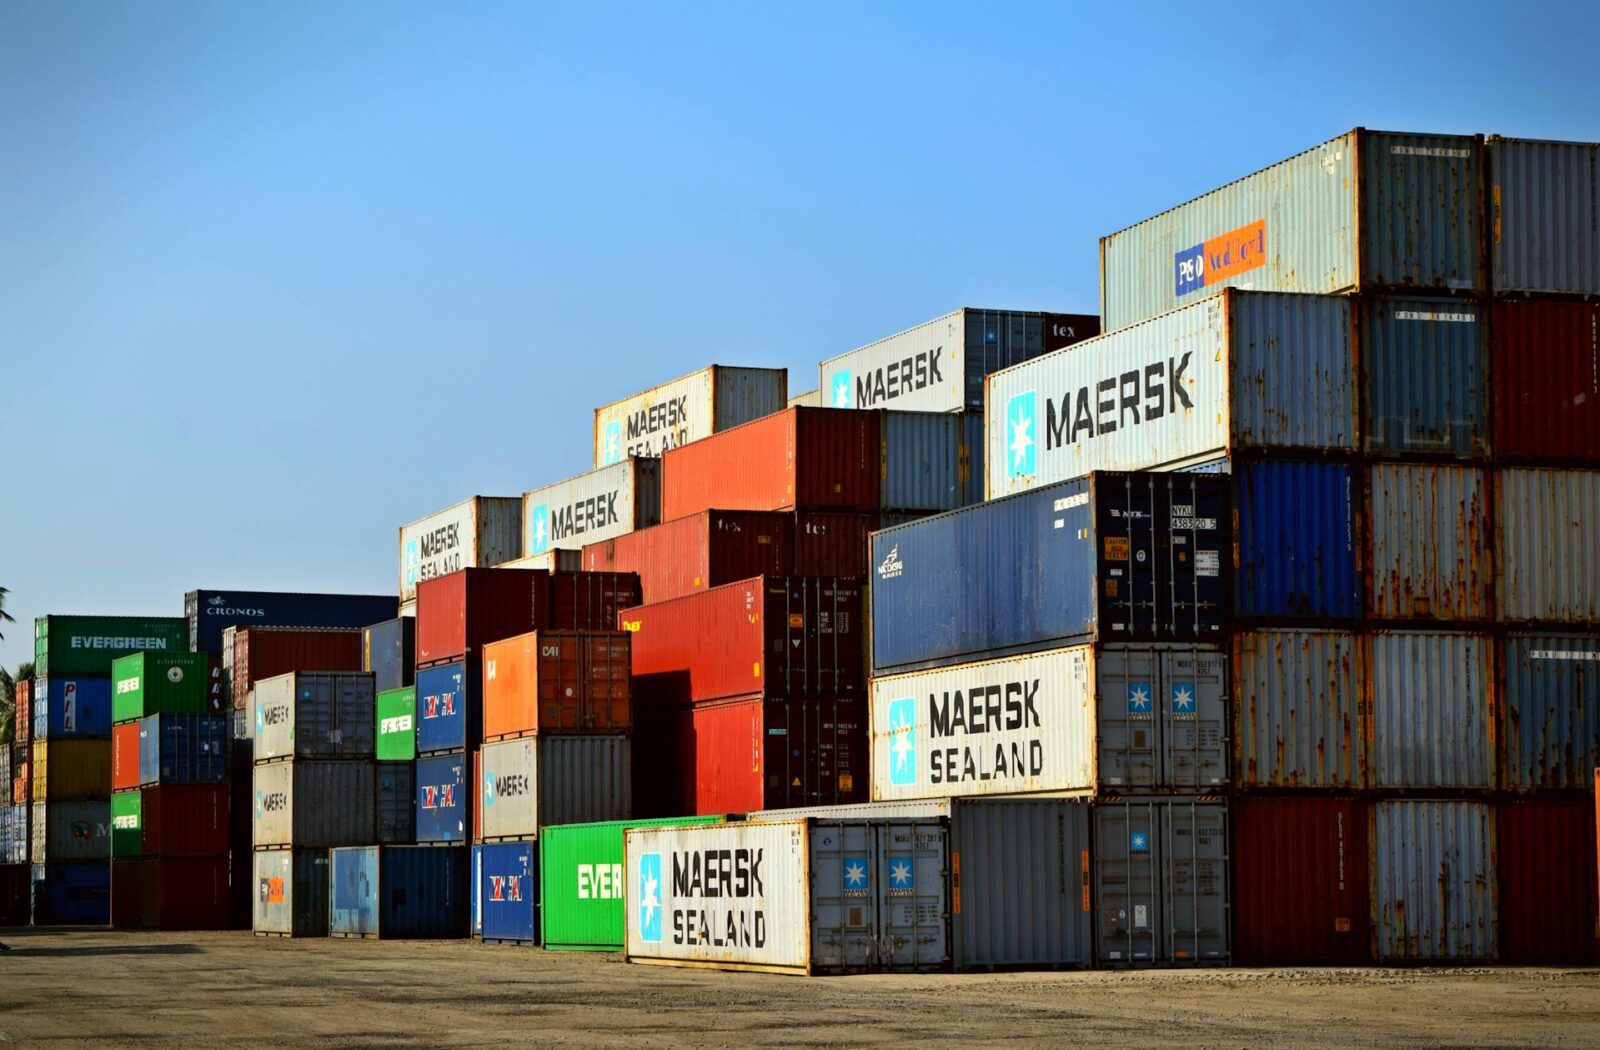 Cargo containers awaiting import warehousing